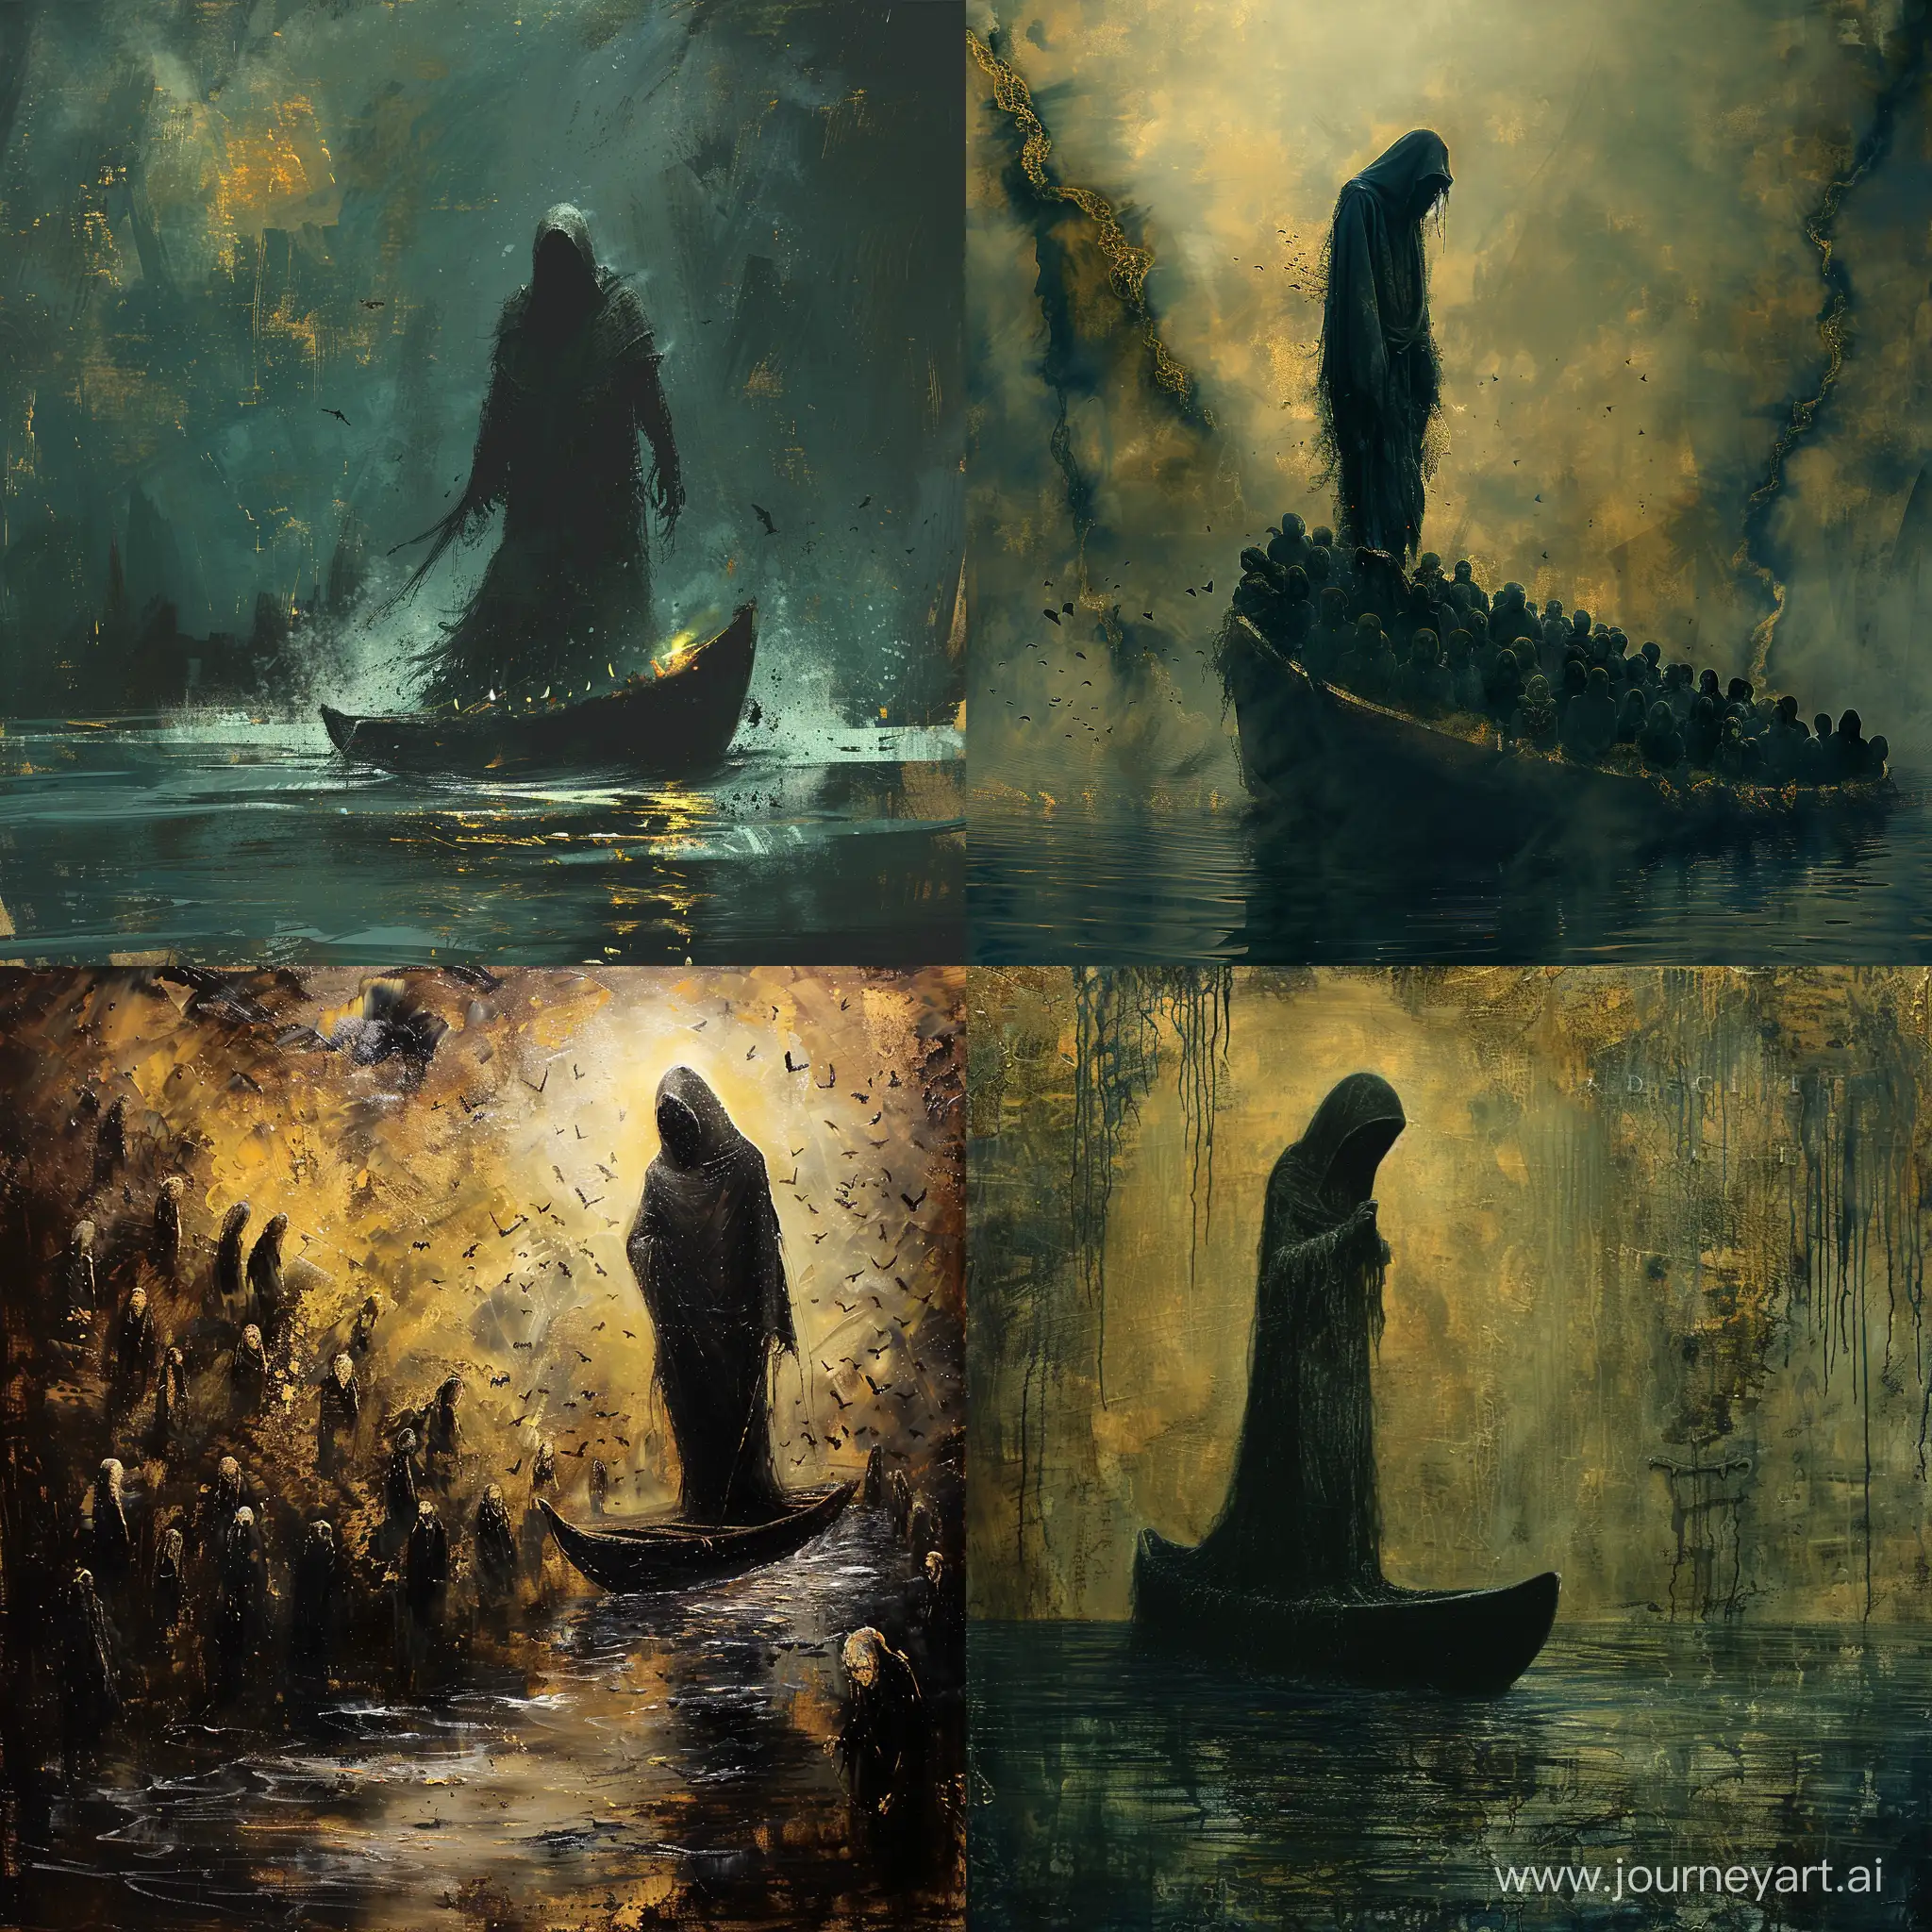 Ethereal-Ferryman-Guiding-Souls-on-a-River-Enigmatic-Oil-Painting